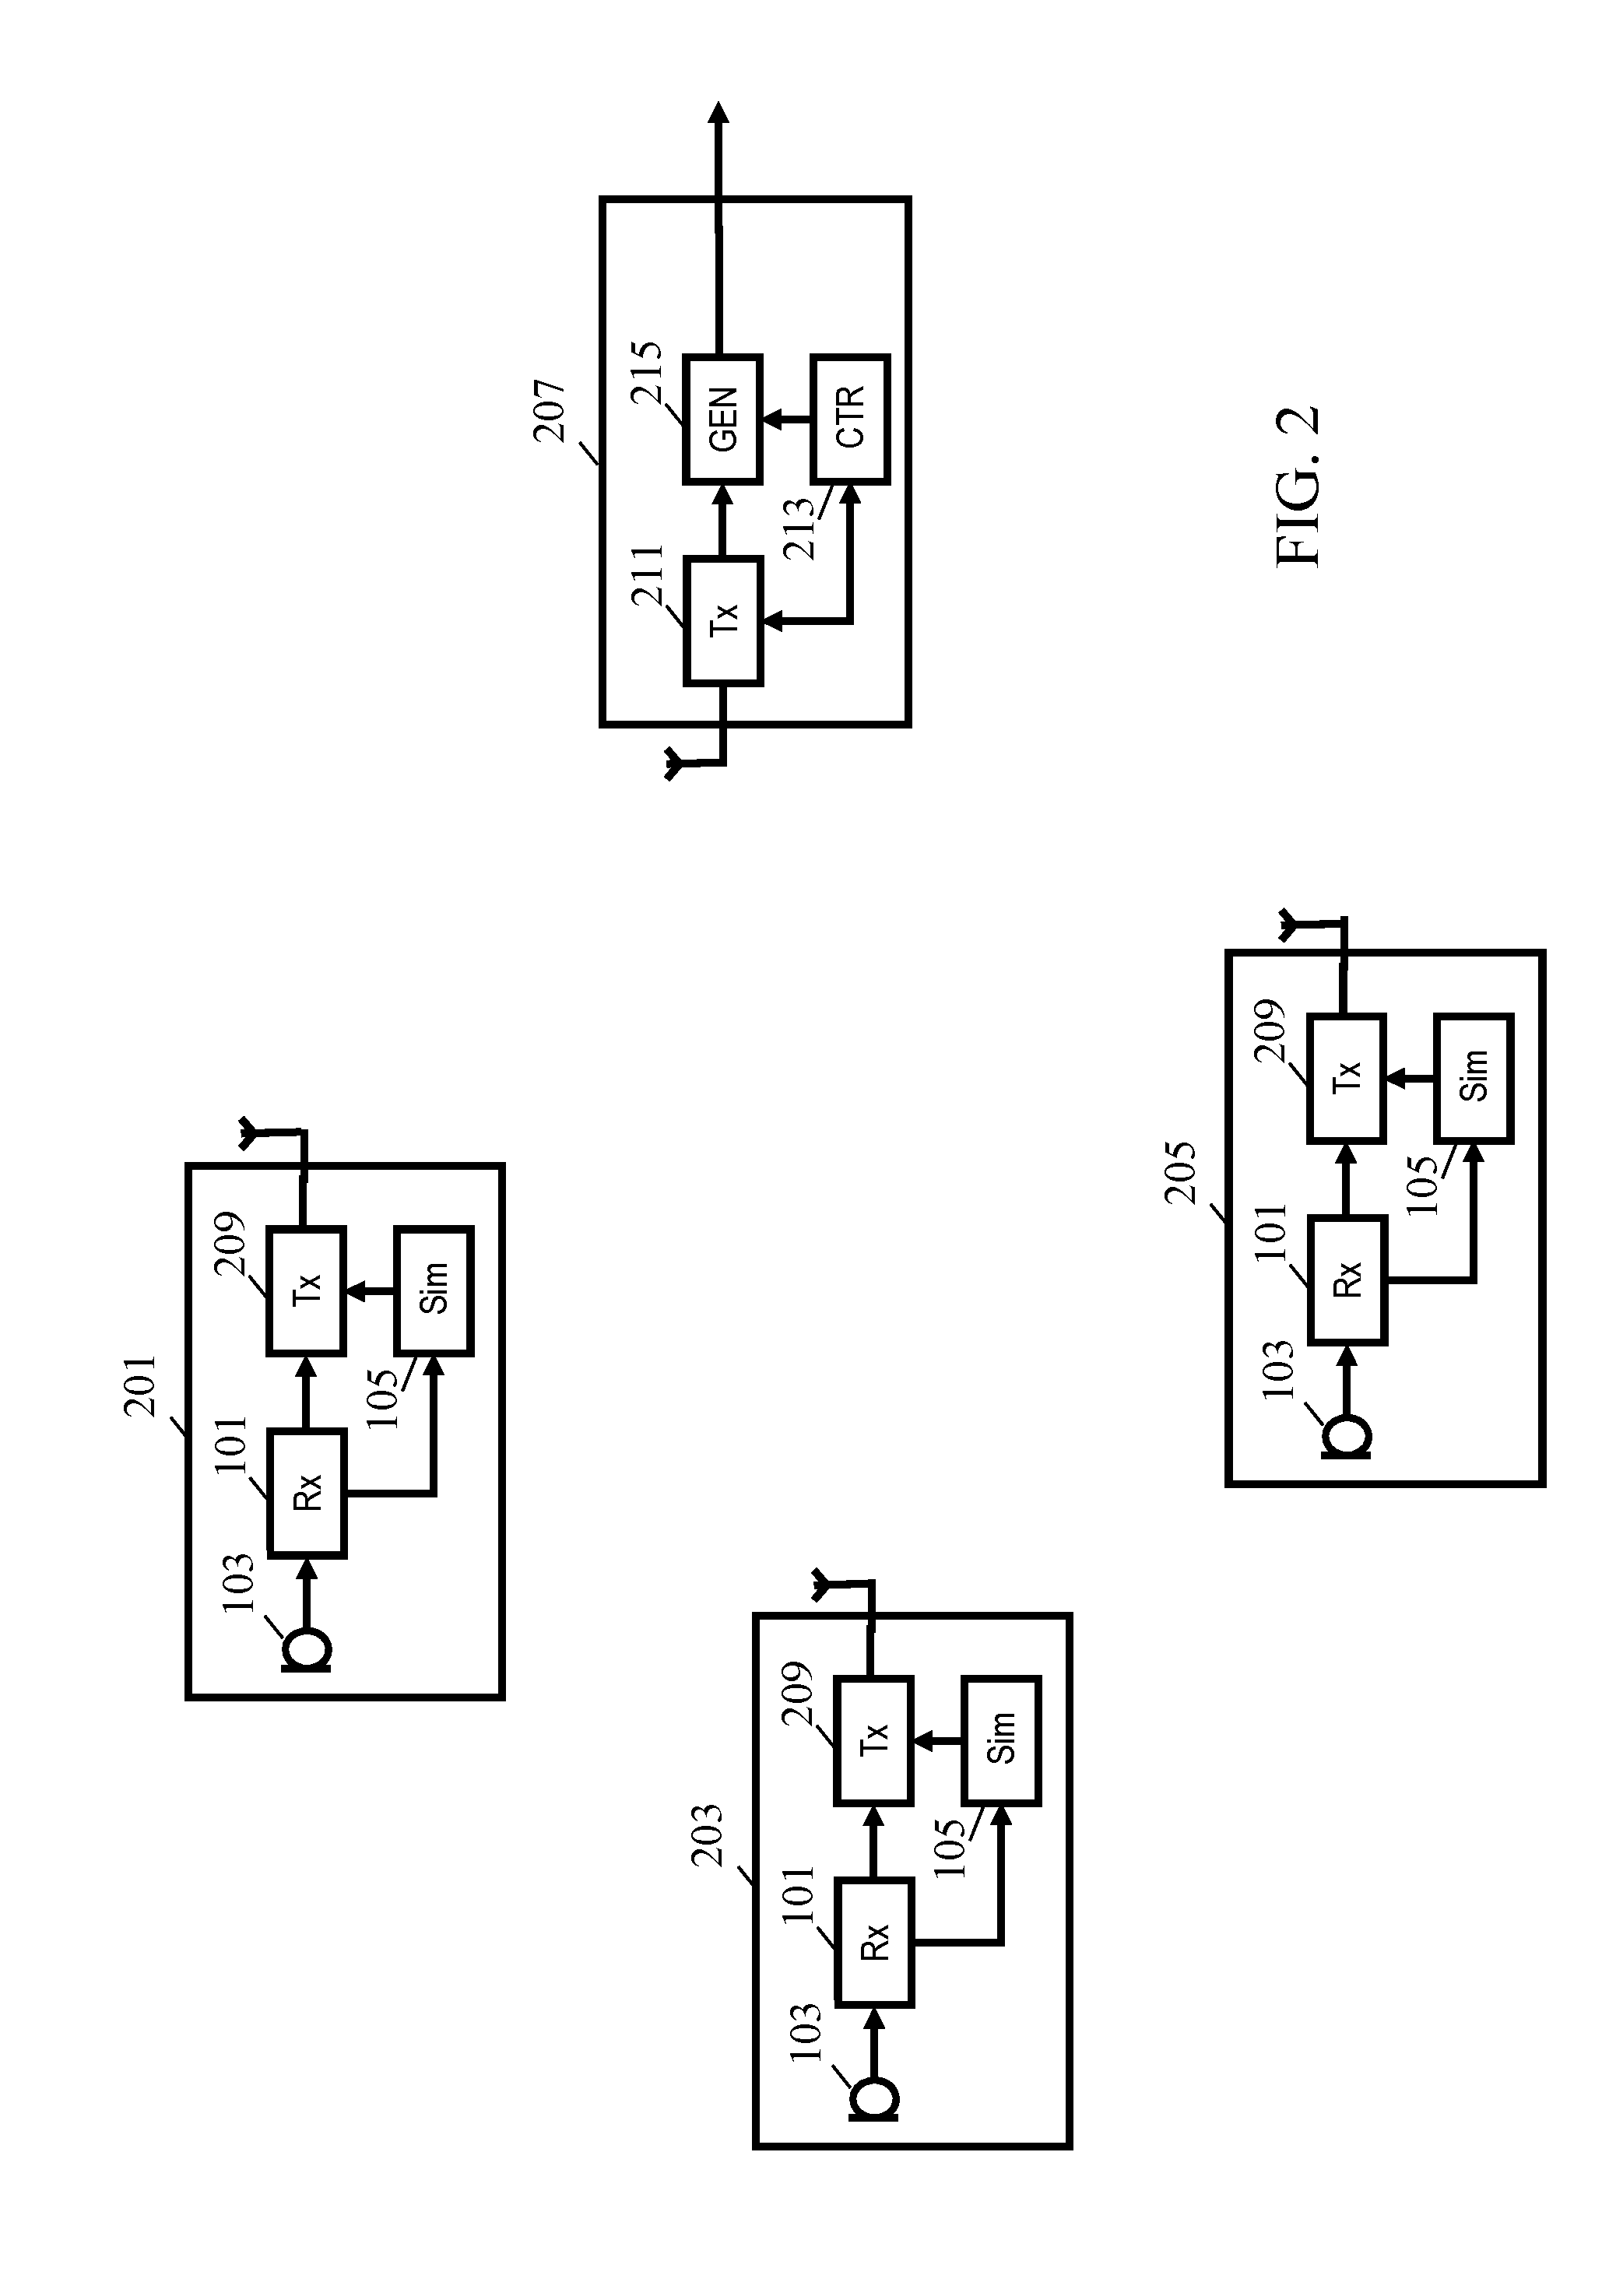 Method and apparatus for generating a speech signal